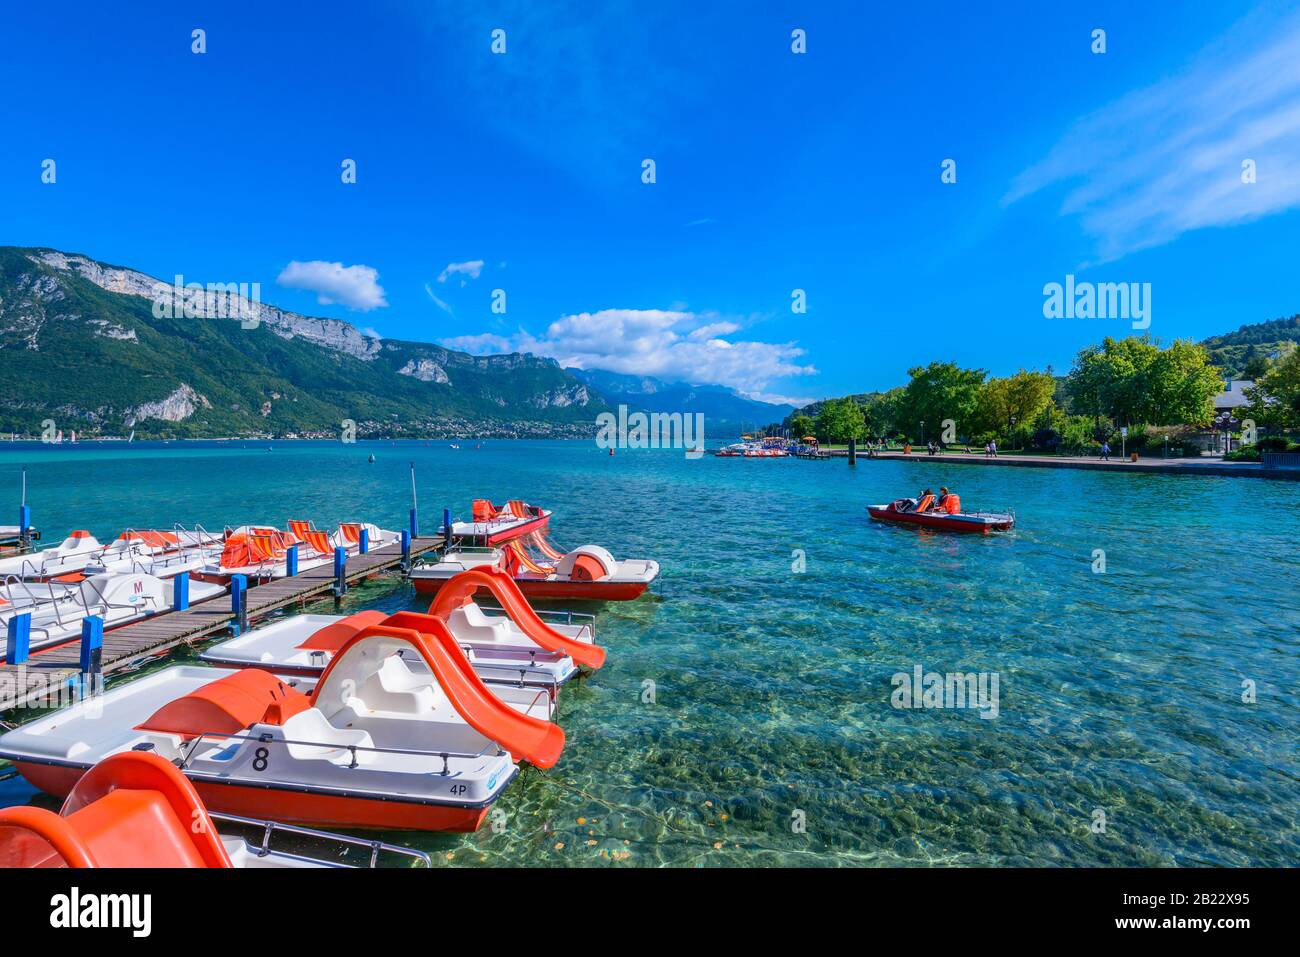 Pedal boats on Lake Annecy, one of the largest lakes in France known as the cleanest lake in Europe, viewed from Jardins de l'Europe park. Stock Photo